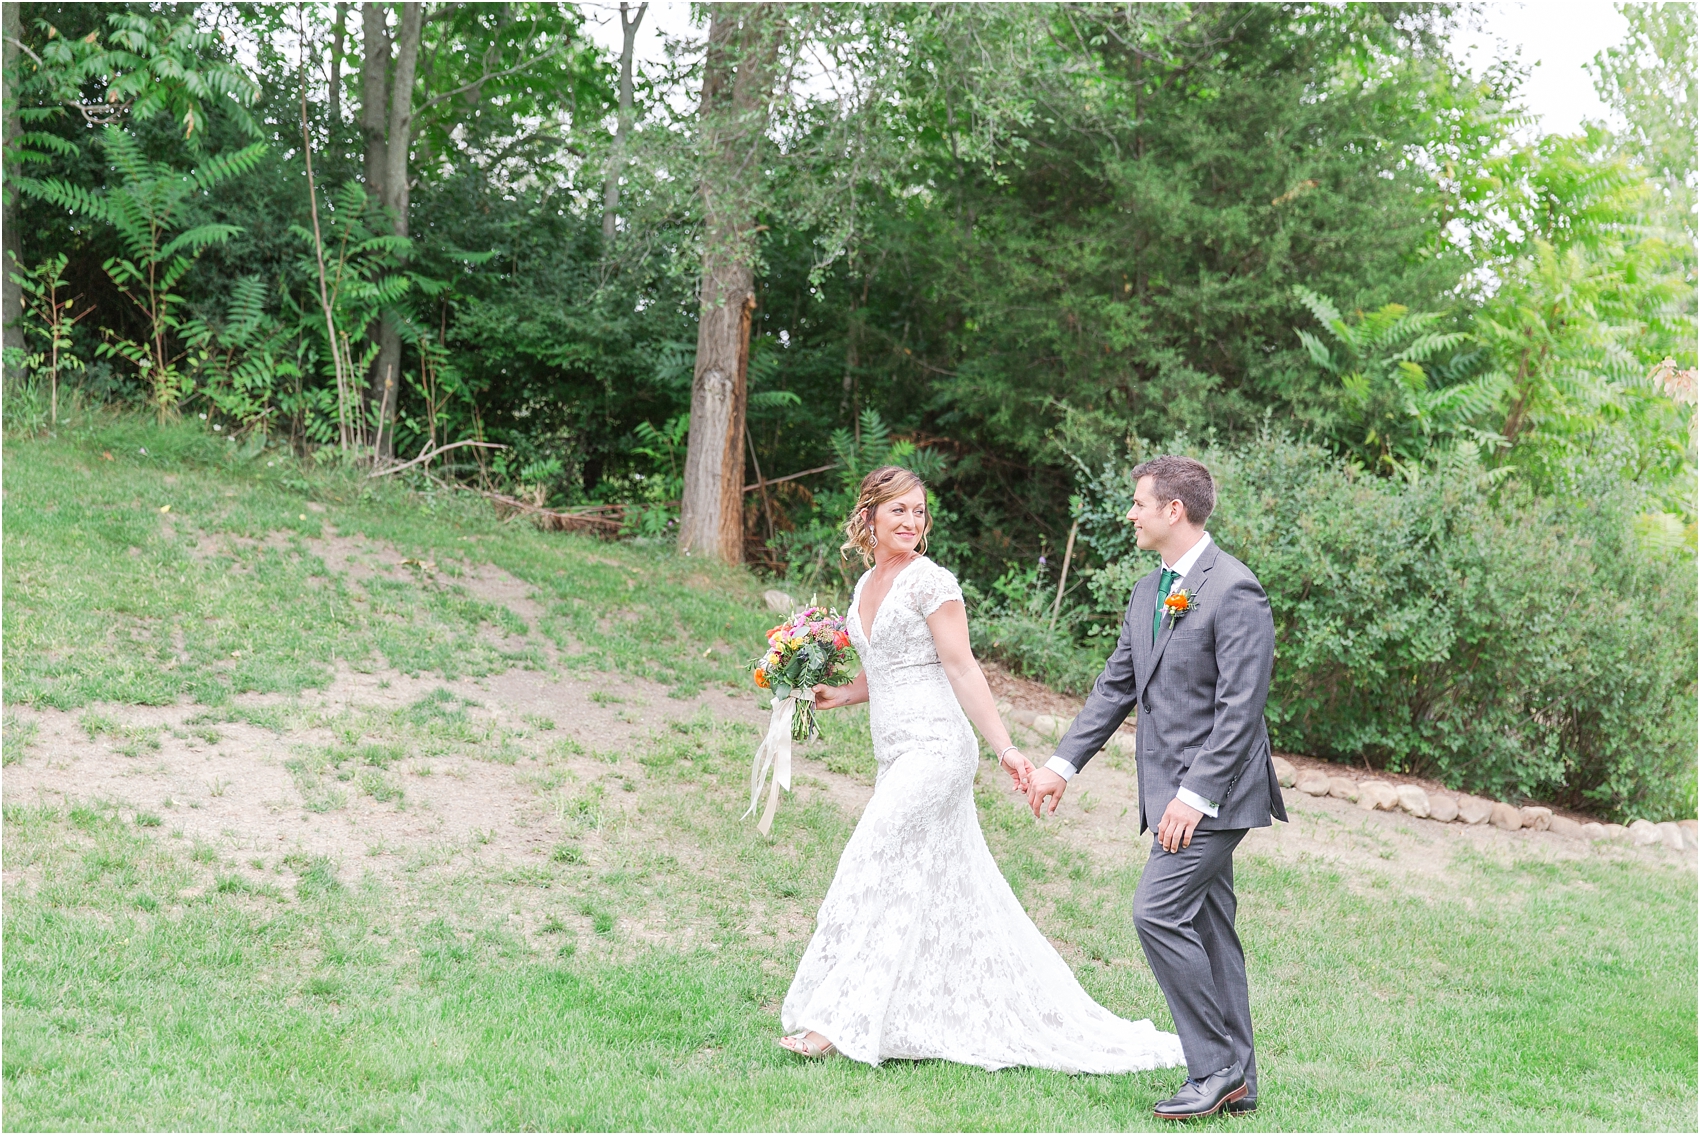 romantic-intimate-backyard-wedding-photos-at-private-estate-in-ann-arbor-mi-by-courtney-carolyn-photography_0046.jpg